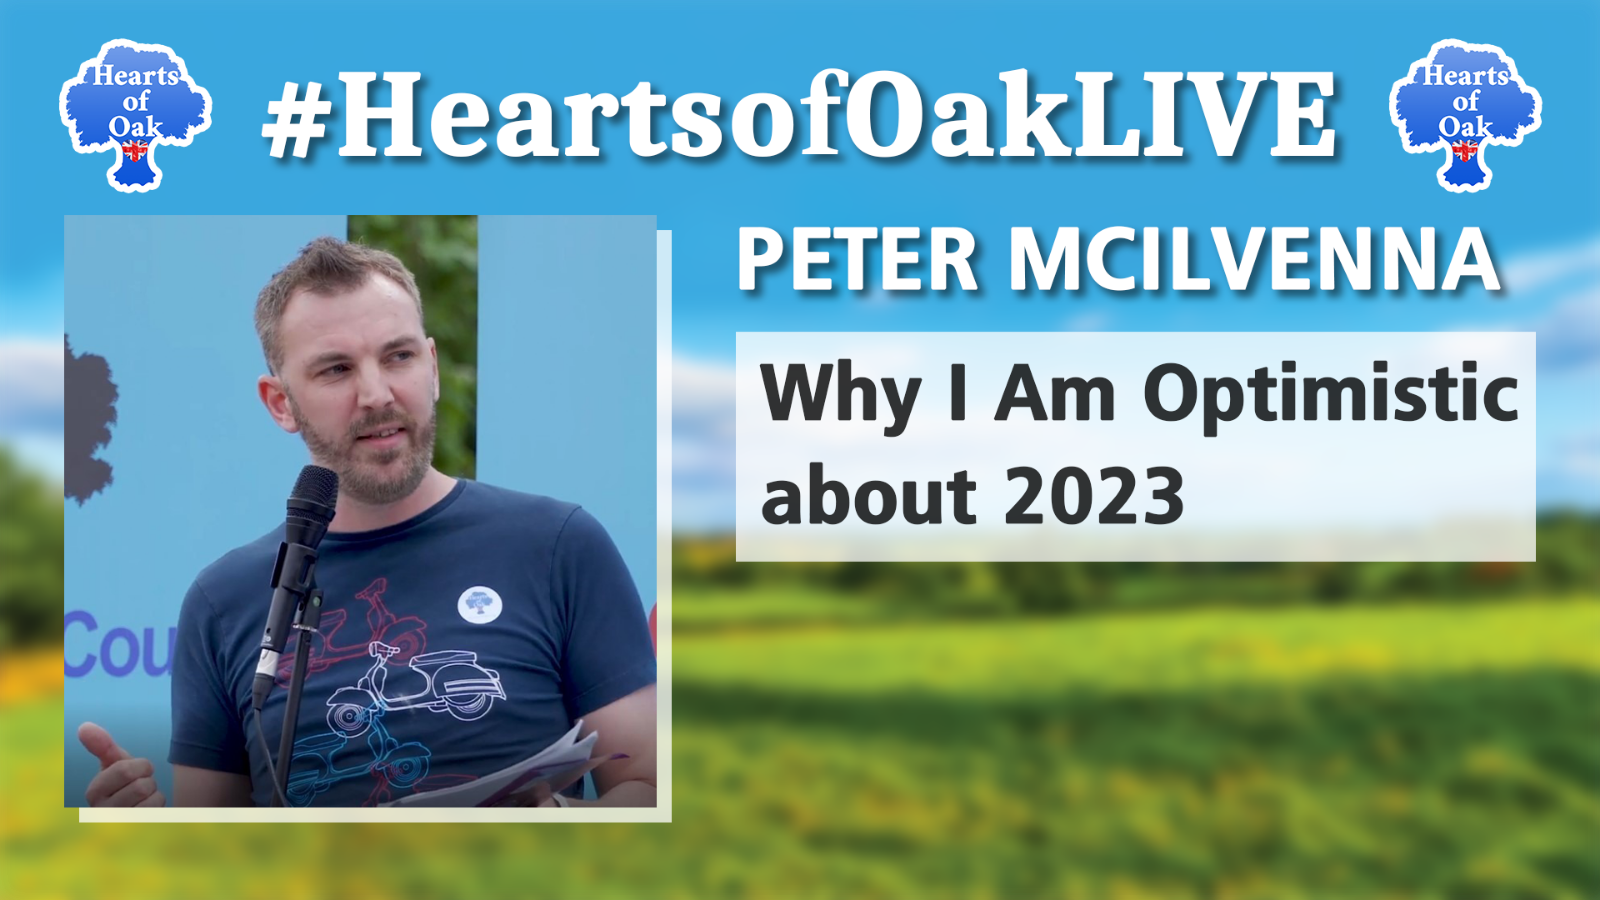 Peter Mcilvenna - Why I Am Optimistic about 2023